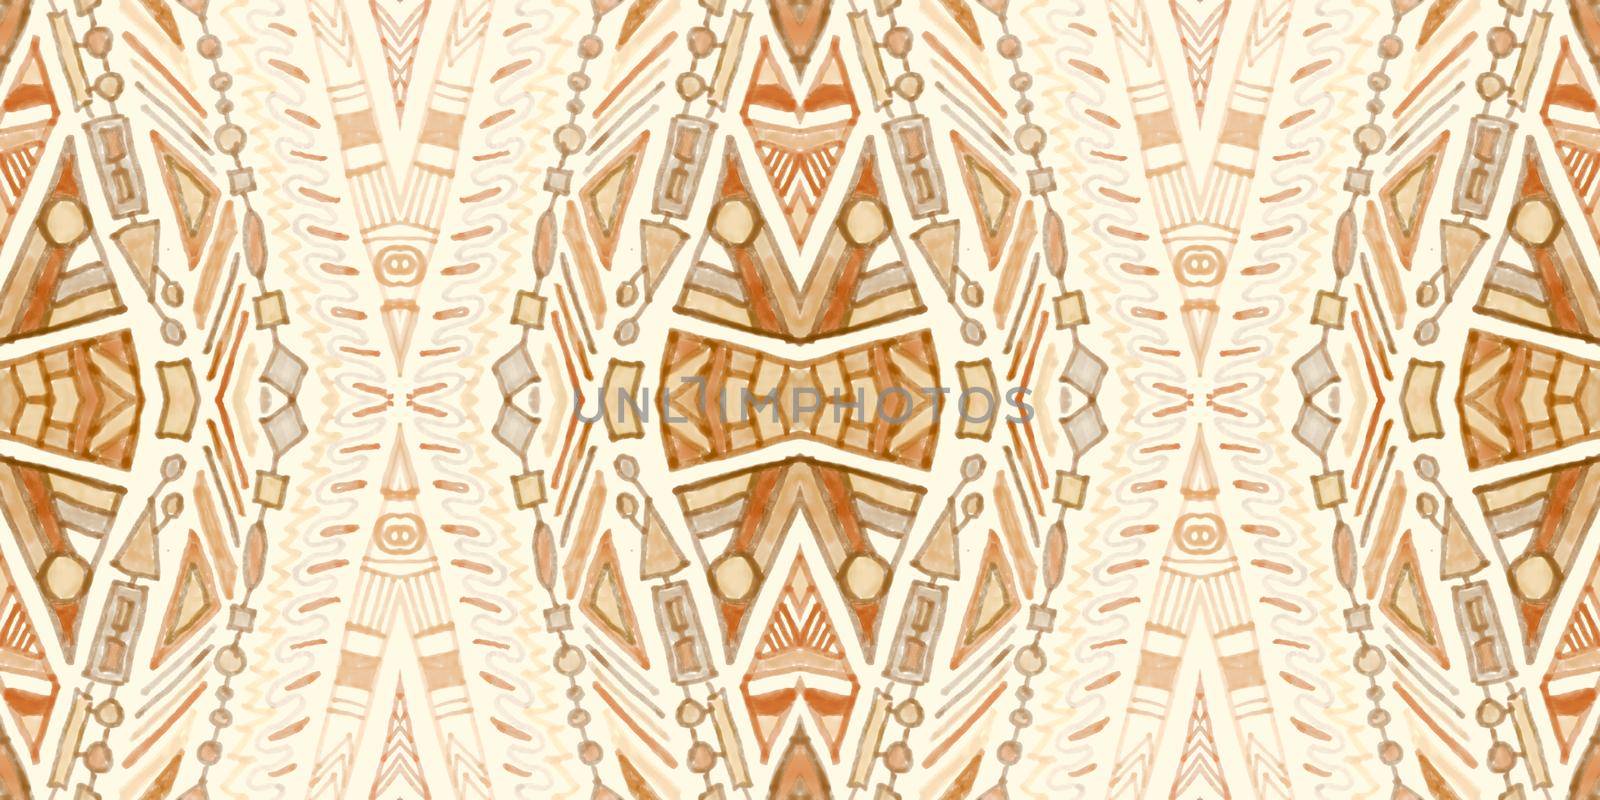 Geometric tribal ribbon. Seamless ethnic pattern. Traditional aztec background. Mexican american texture. Vintage tribal ribbon. Abstract maya design for fabric. Grunge navajo print.